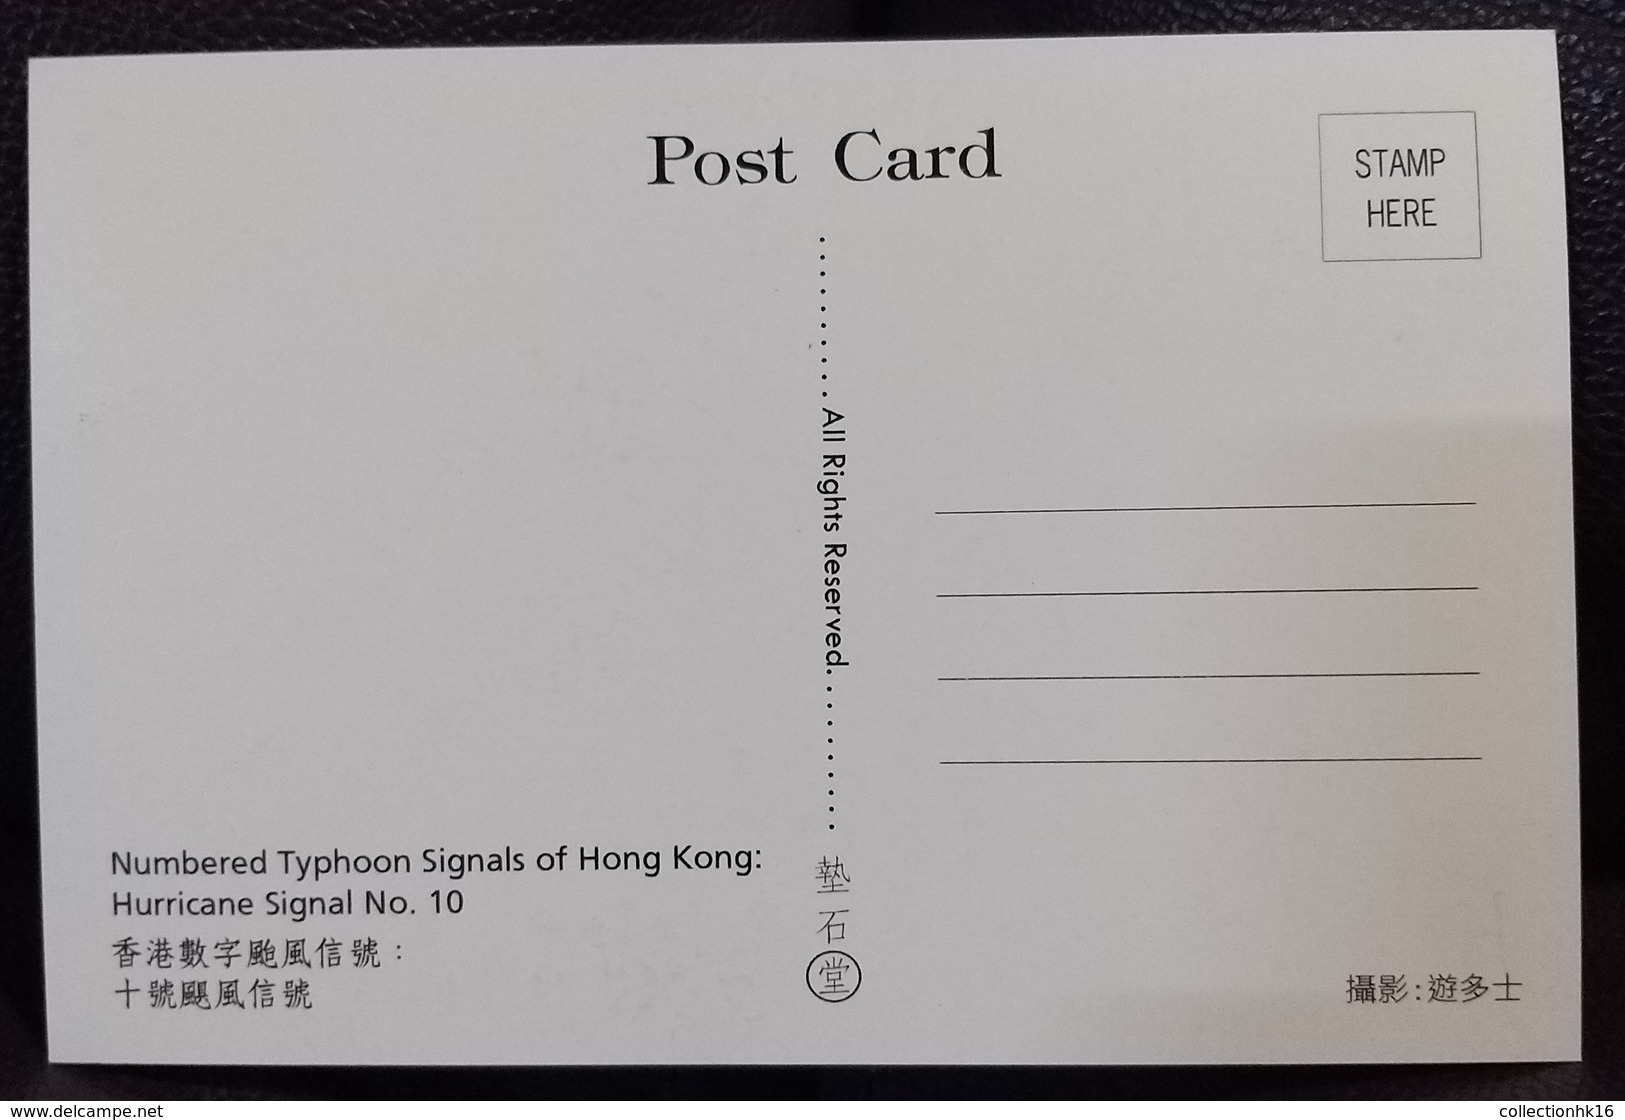 100 Years of Numbered Typhoon Signals 2017 Hong Kong Maximum card MC (Pictorial Postmark) (8 cards) B